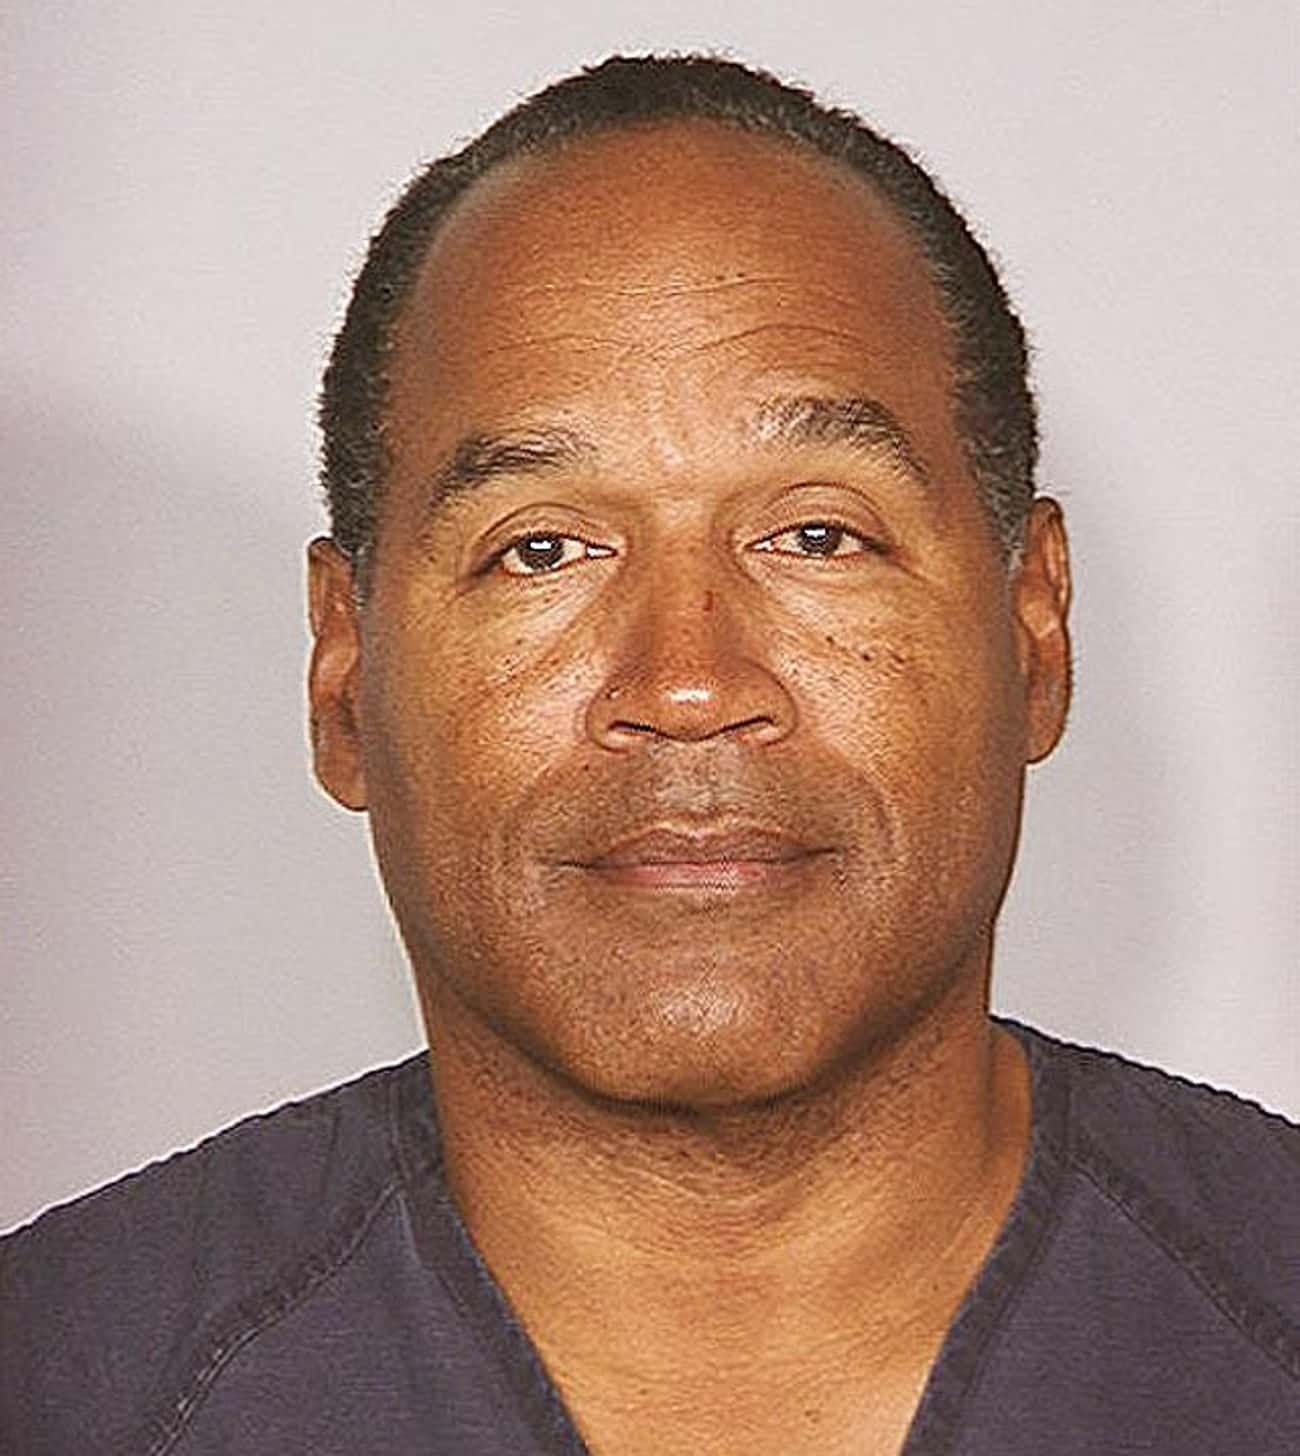 O.J. Simpson - It Hurts to Be Dropped by Hertz